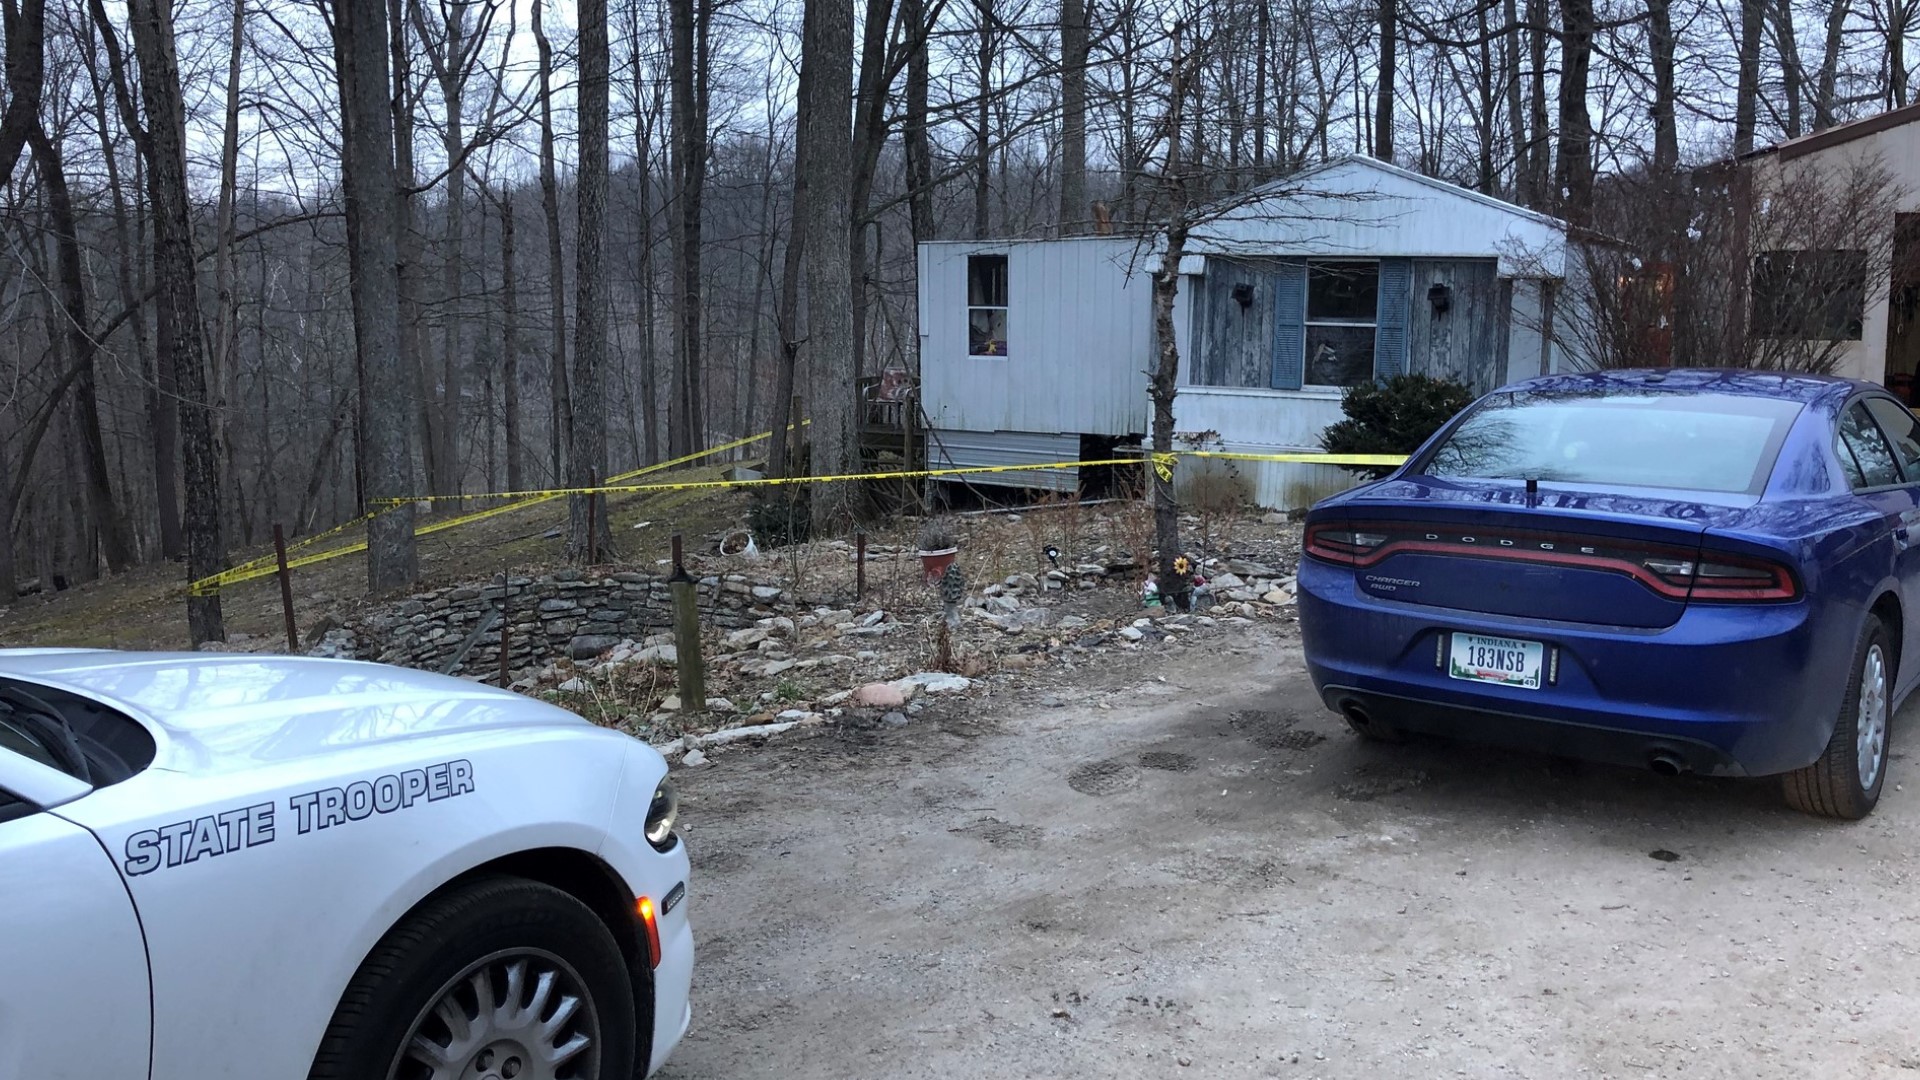 Police were called to the home near Holton early Monday morning. Officers determined the woman was deceased and appeared to have been the victim of a homicide.